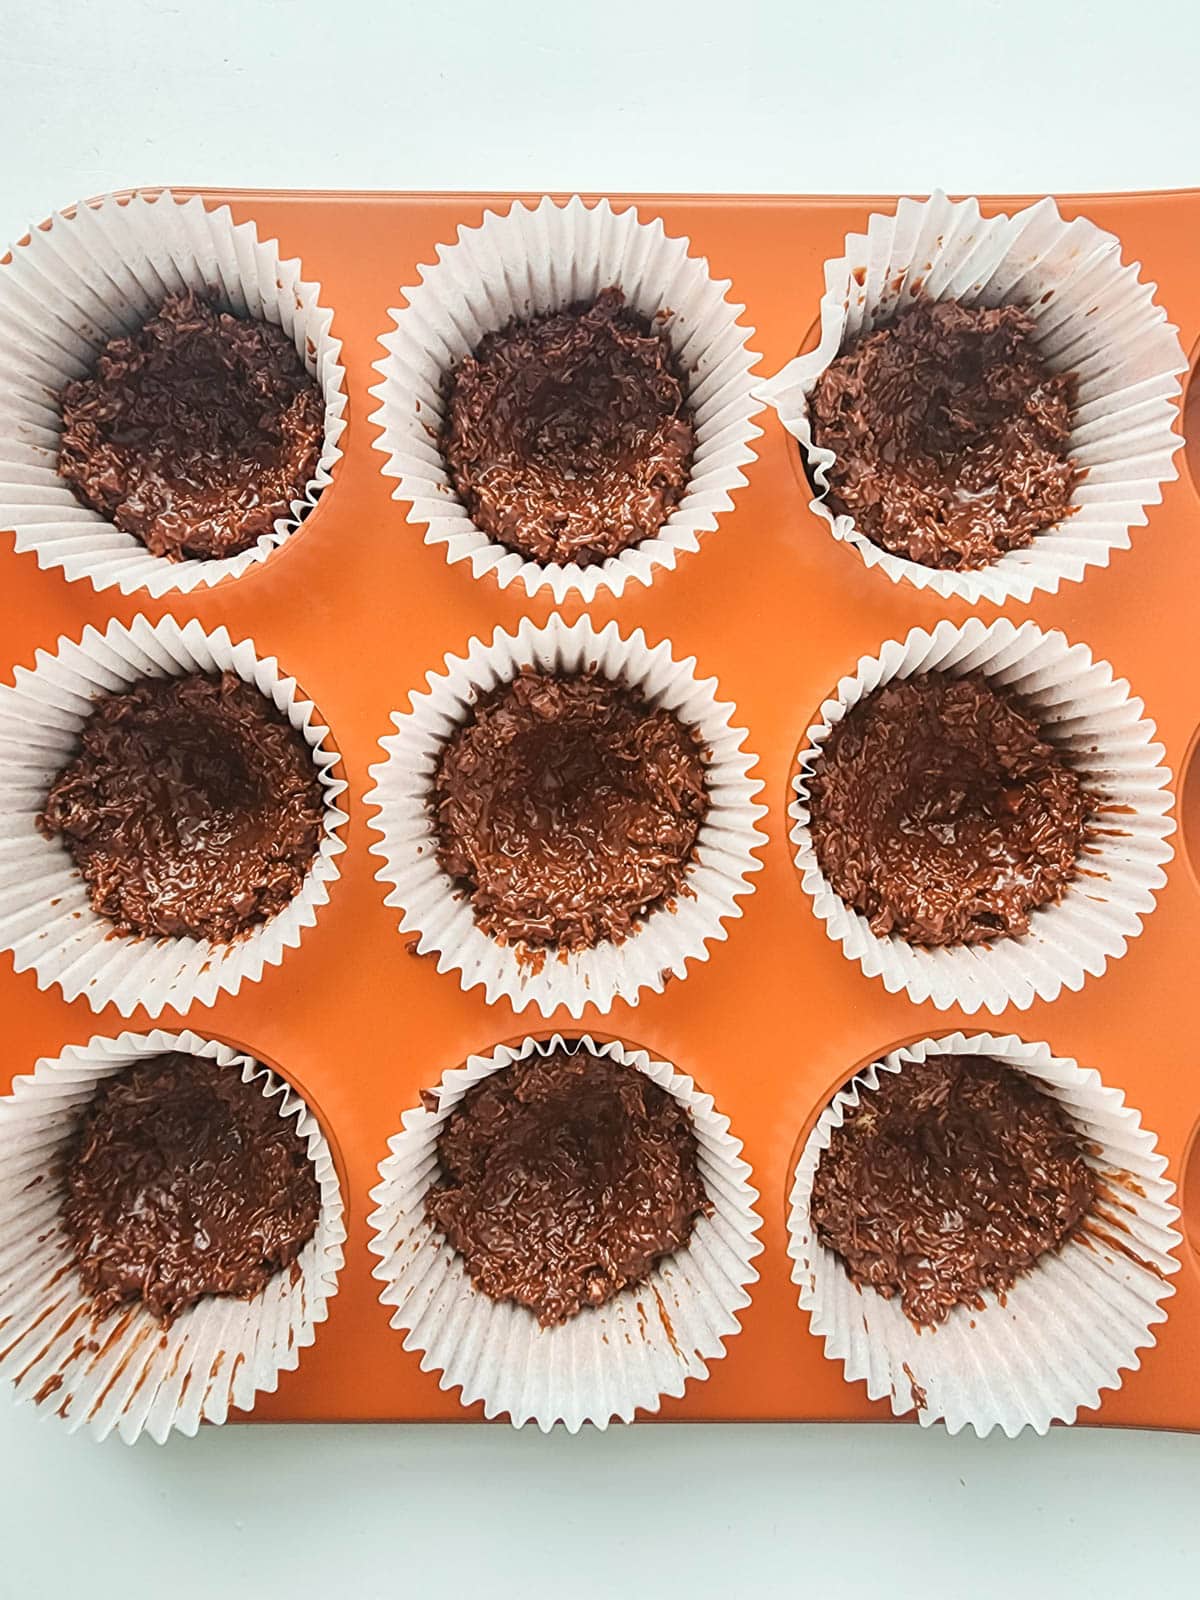 Chocolate "nests" in cupcake wrappers in muffin tin